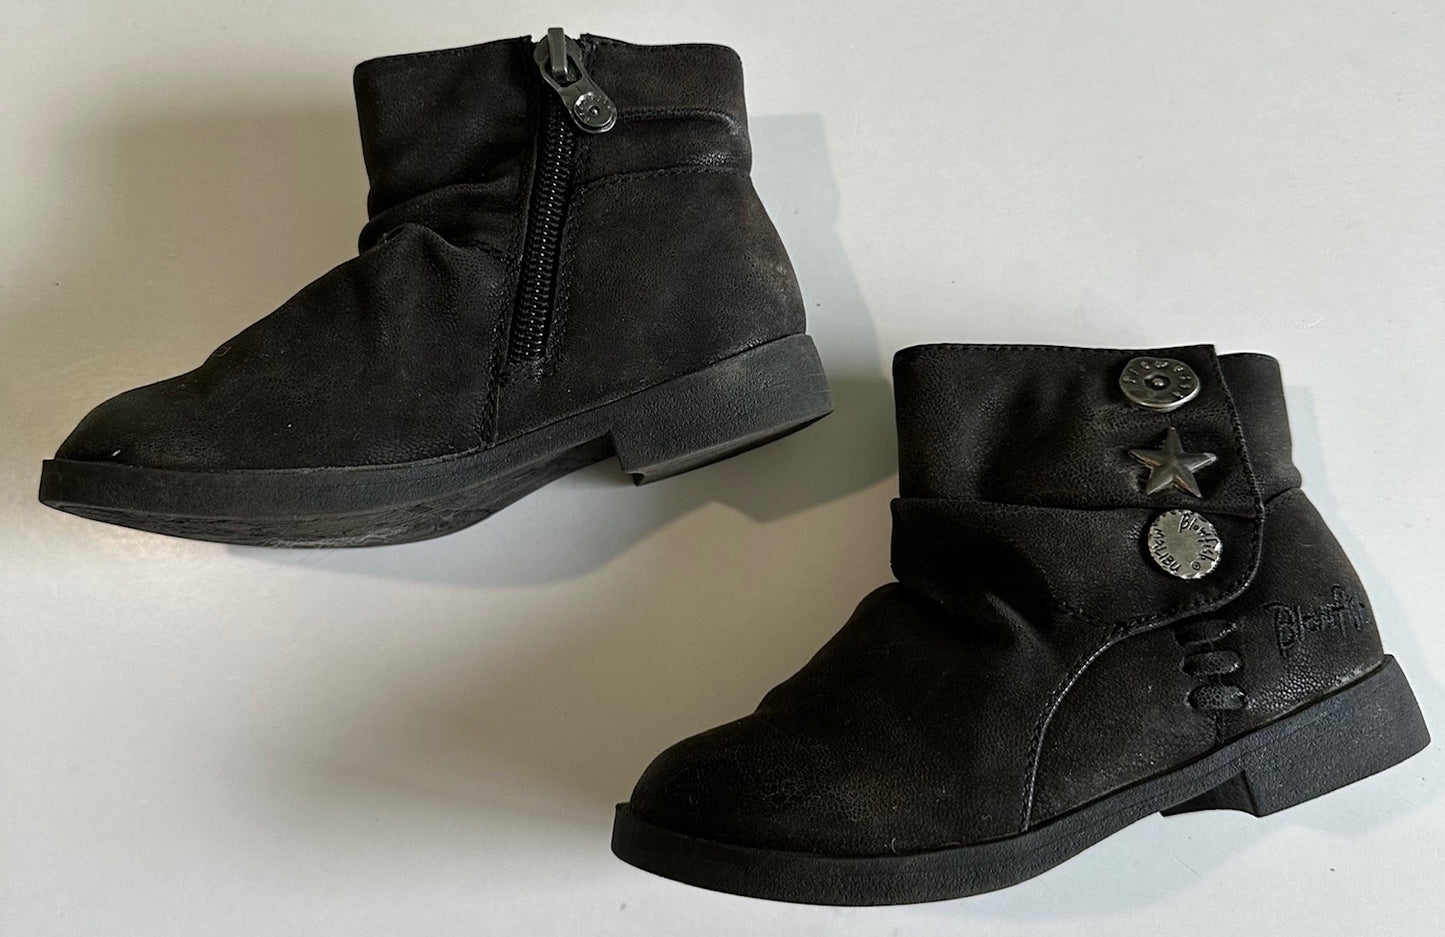 *Play* Blowfish, Black Zipper Ankle Boots - Size 8T